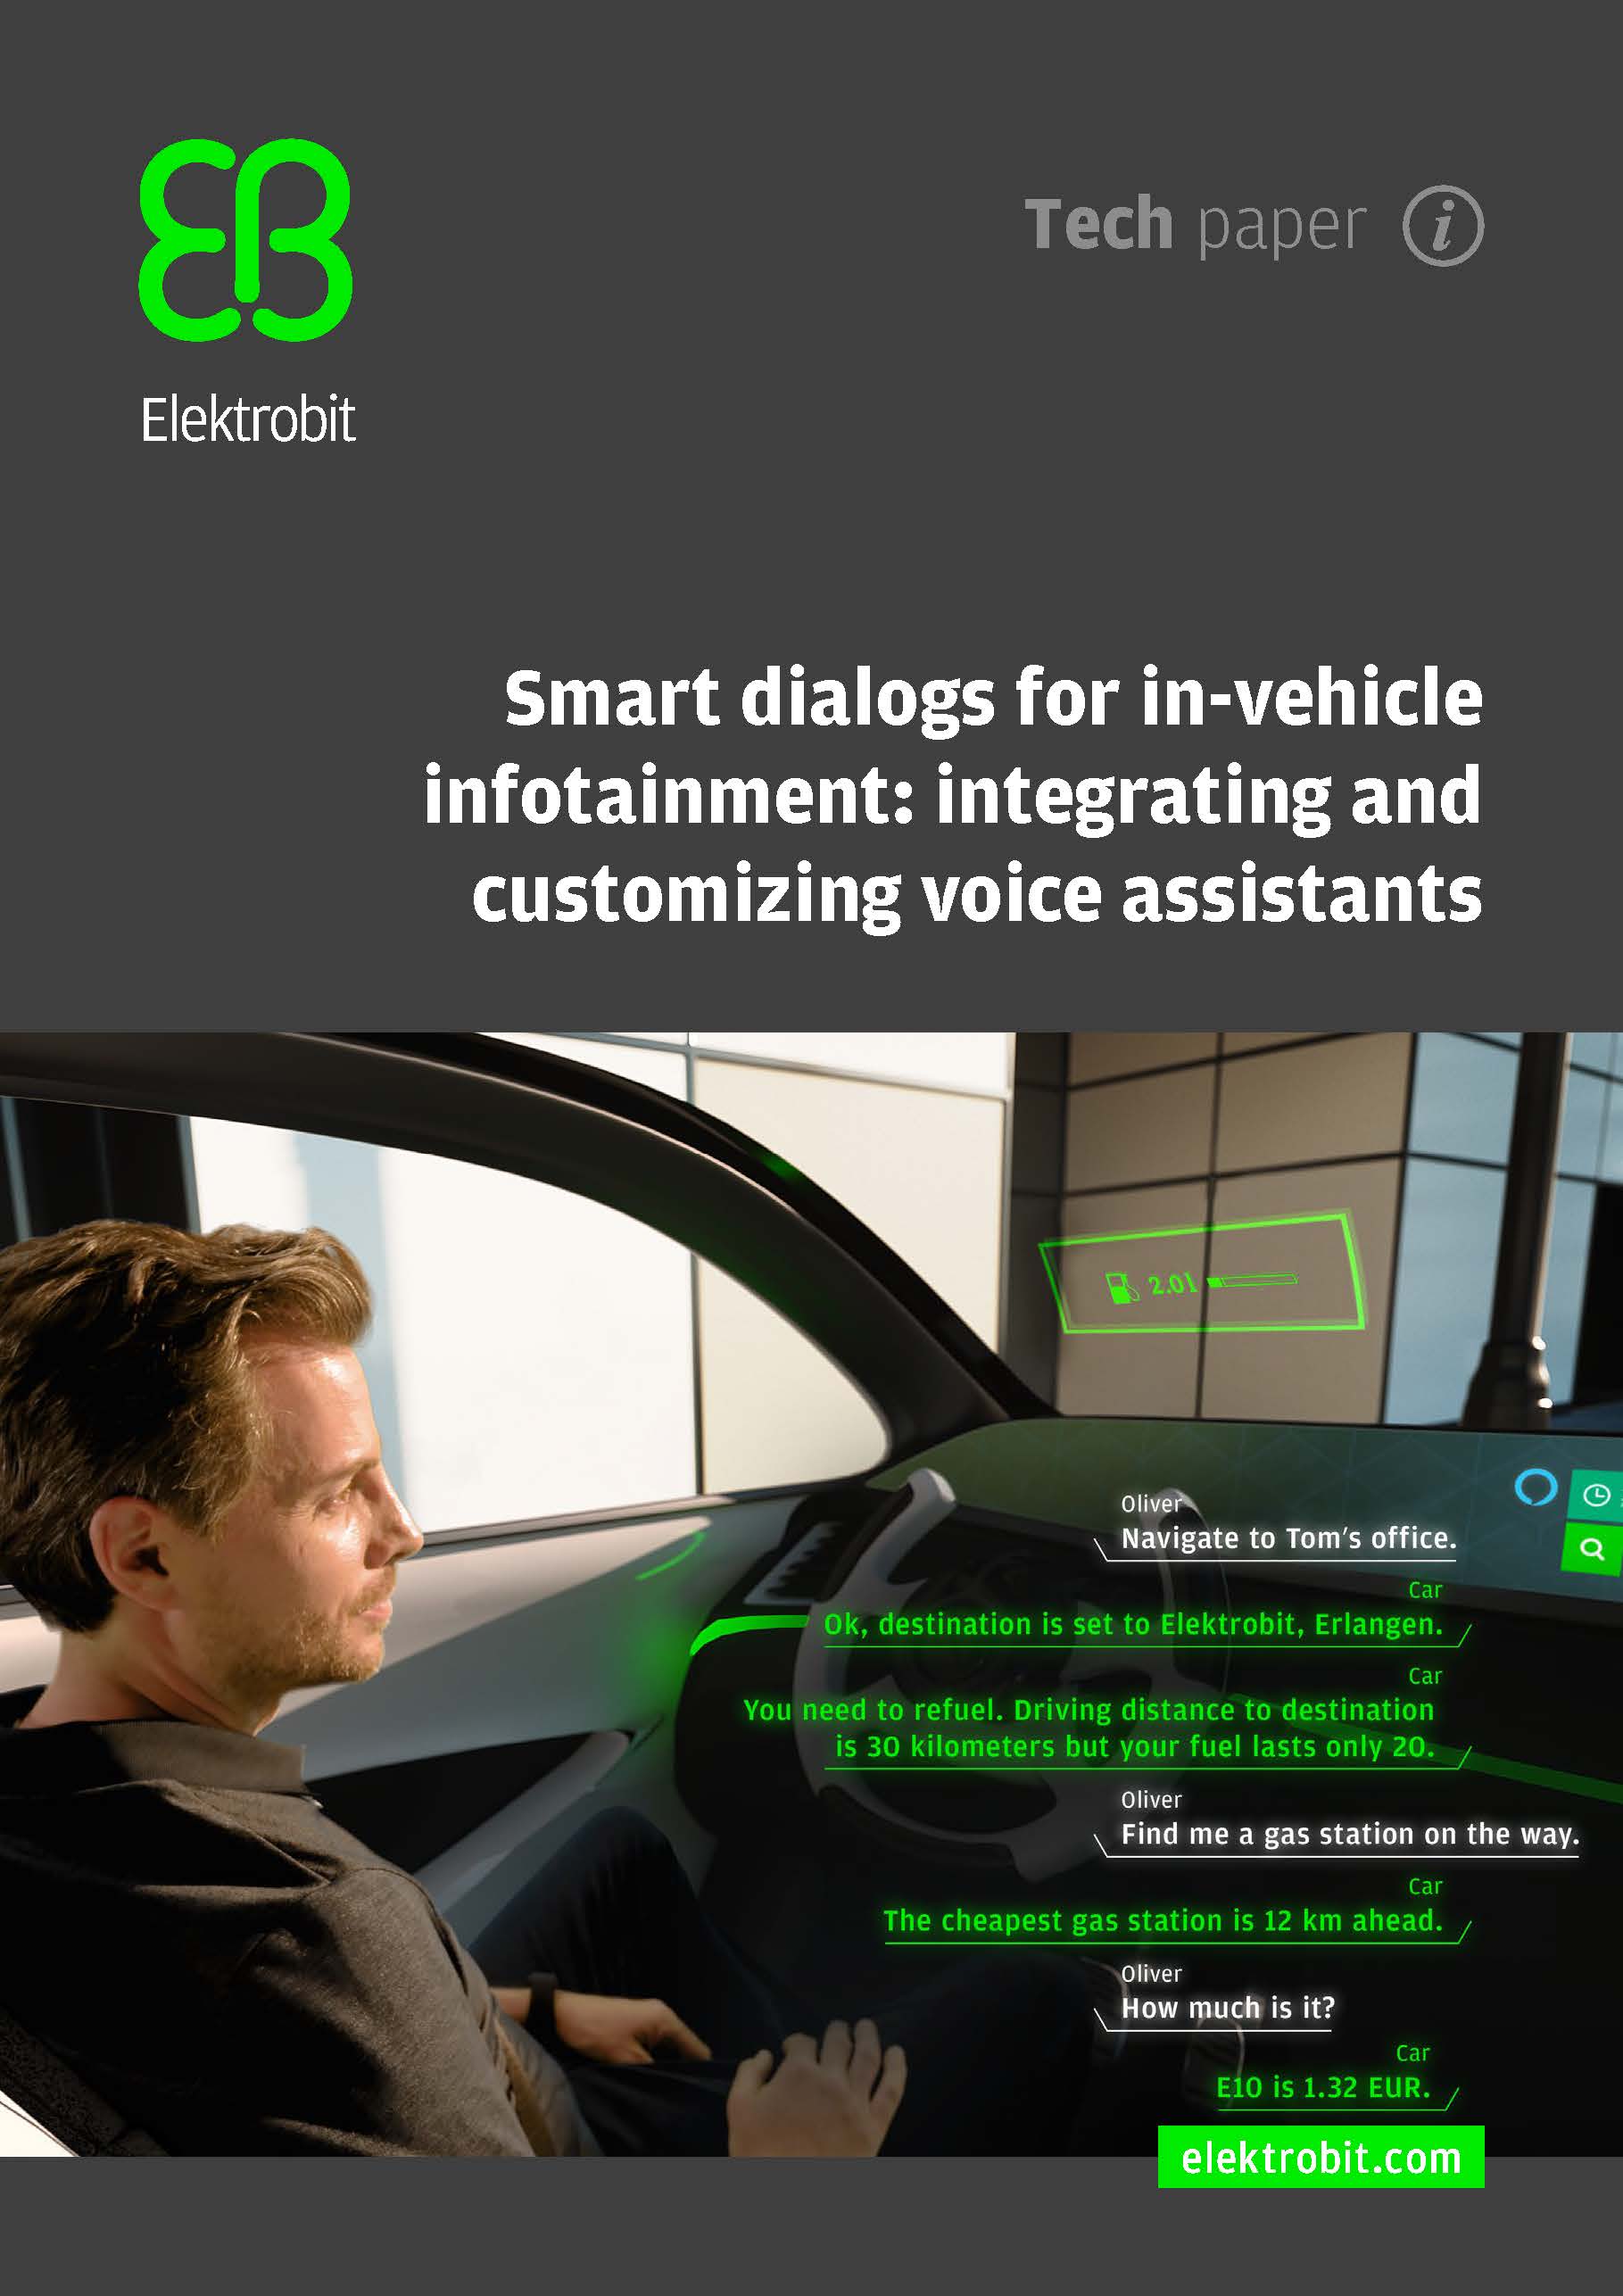 Smart dialogs for in-vehicle infotainment: integrating and customizing voice assistants